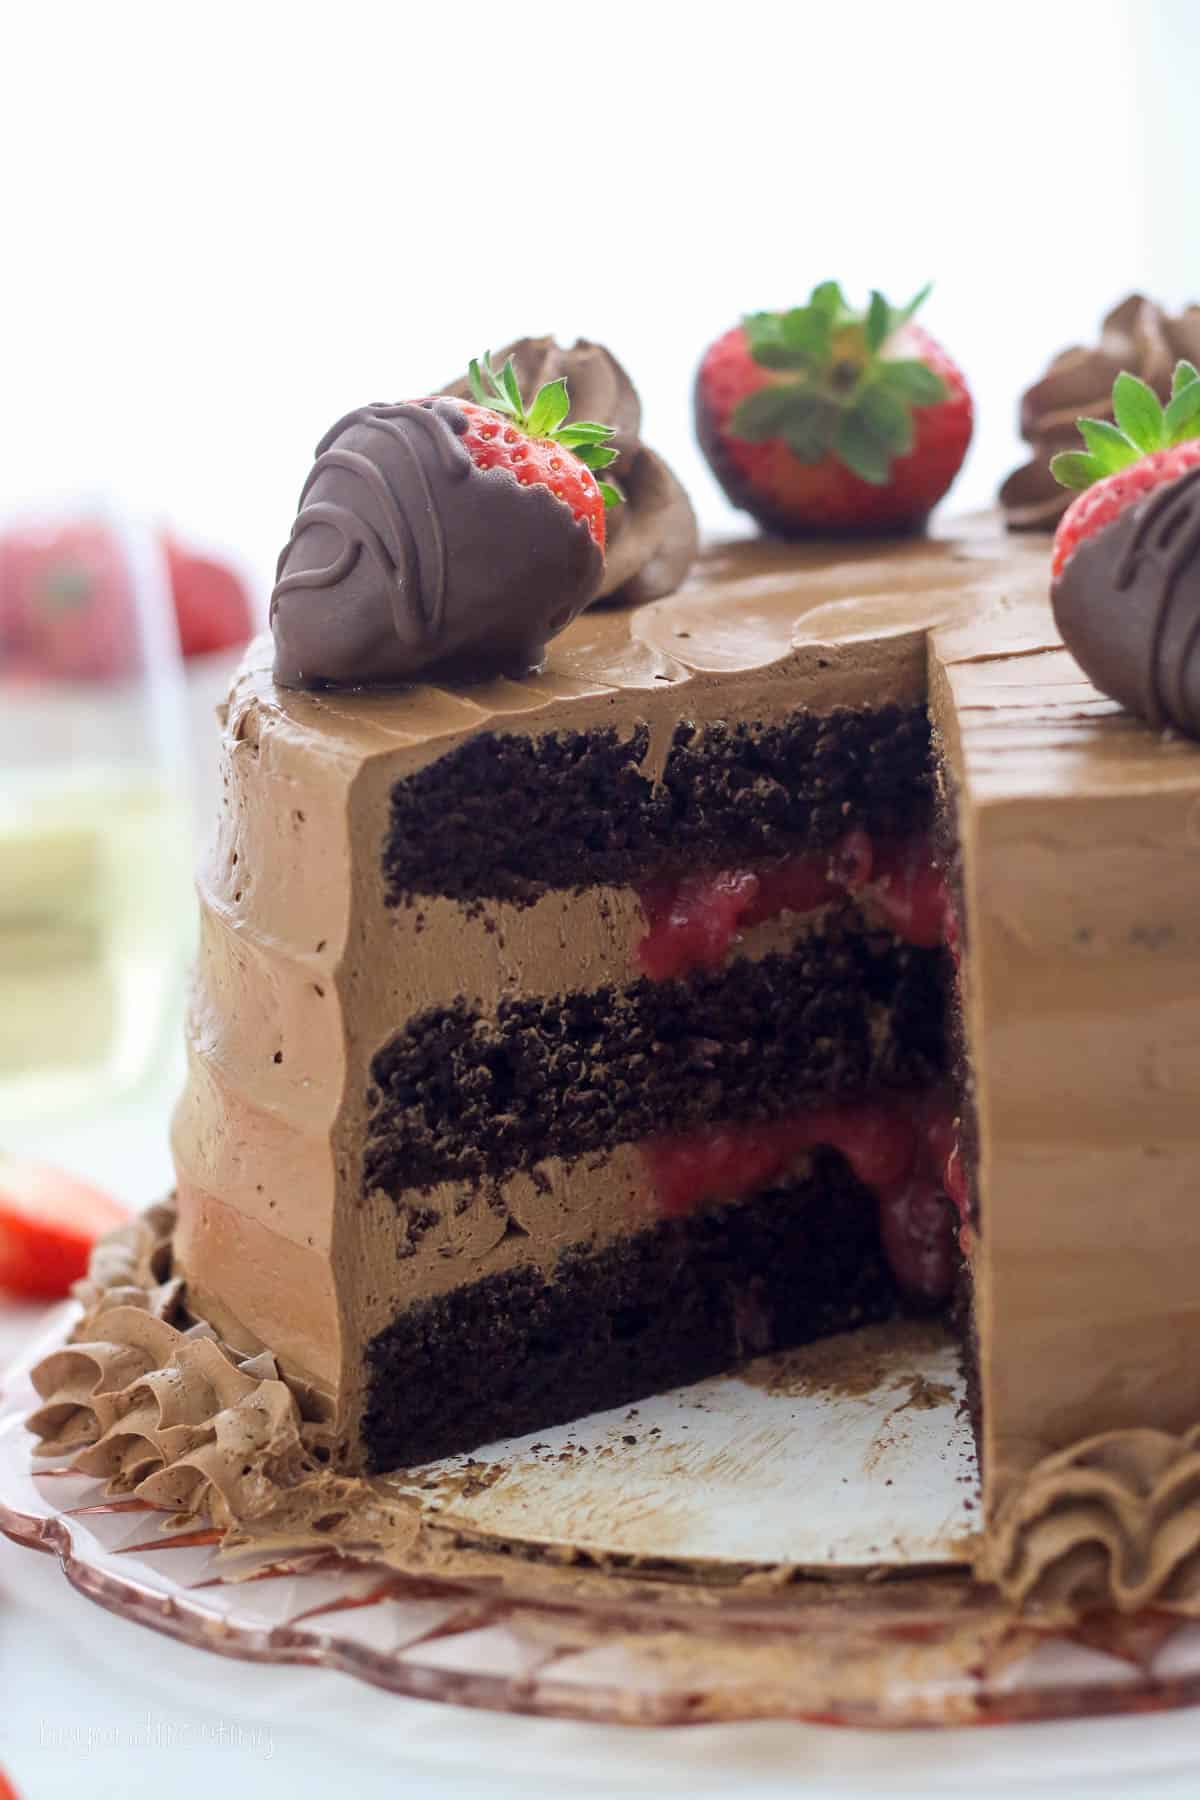 Chocolate strawberry cake decorated with chocolate frosting swirls and chocolate covered strawberries, with a slice missing to show the strawberry filled layers inside.